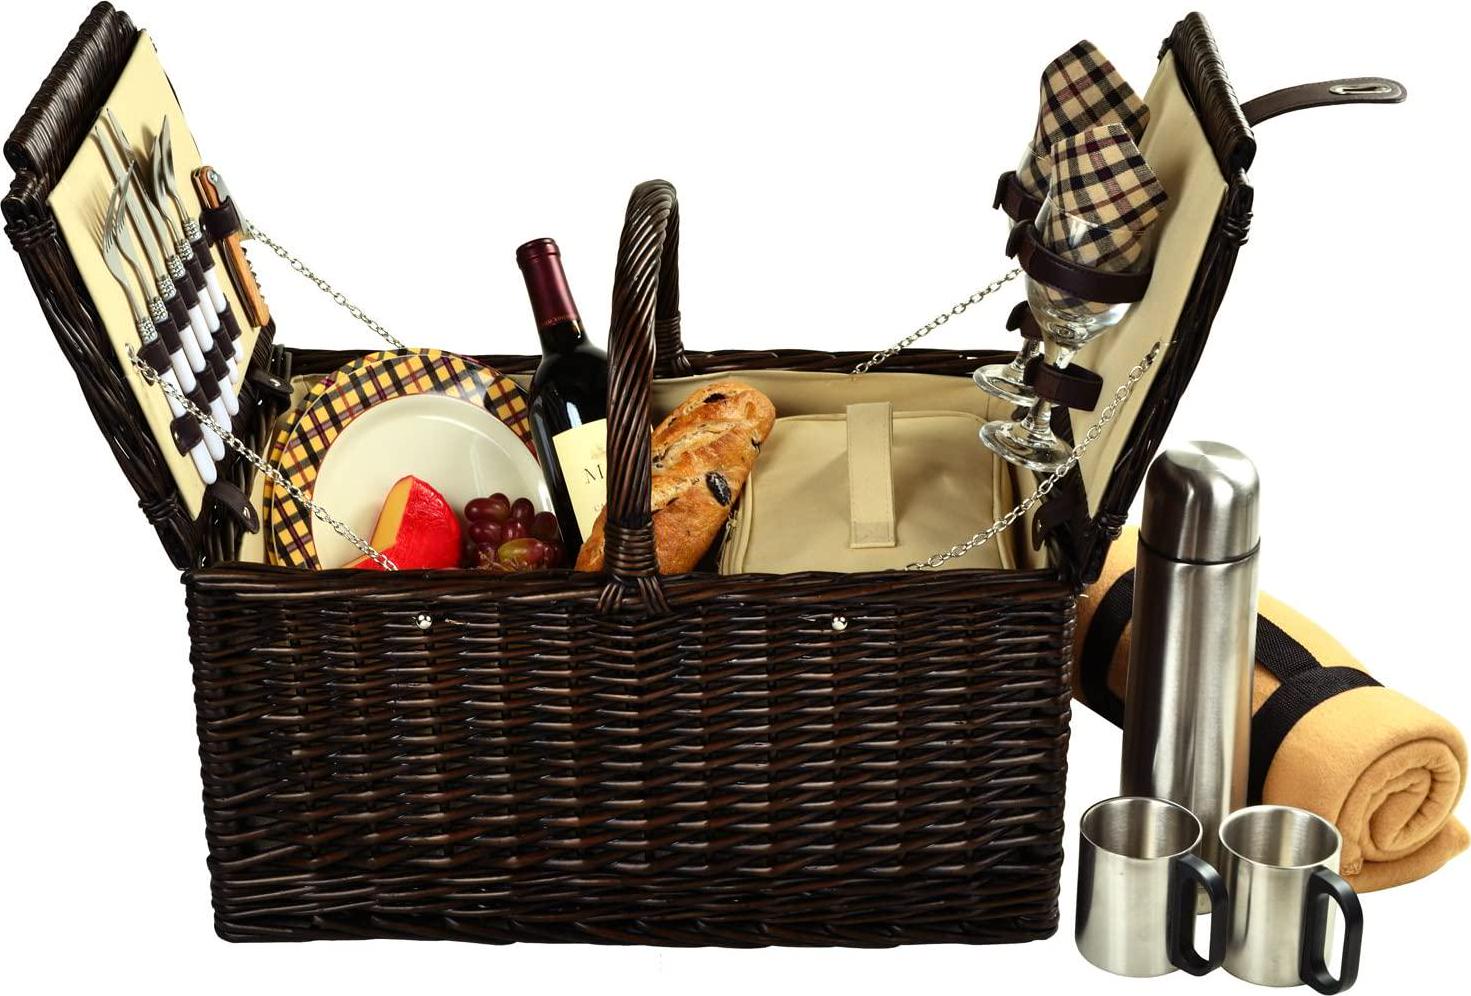 Picnic at Ascot Surrey Willow Picnic Basket with Service for 2 with Blanket and Coffee Set- Designed, Assembled and Quality Approved in the USA-